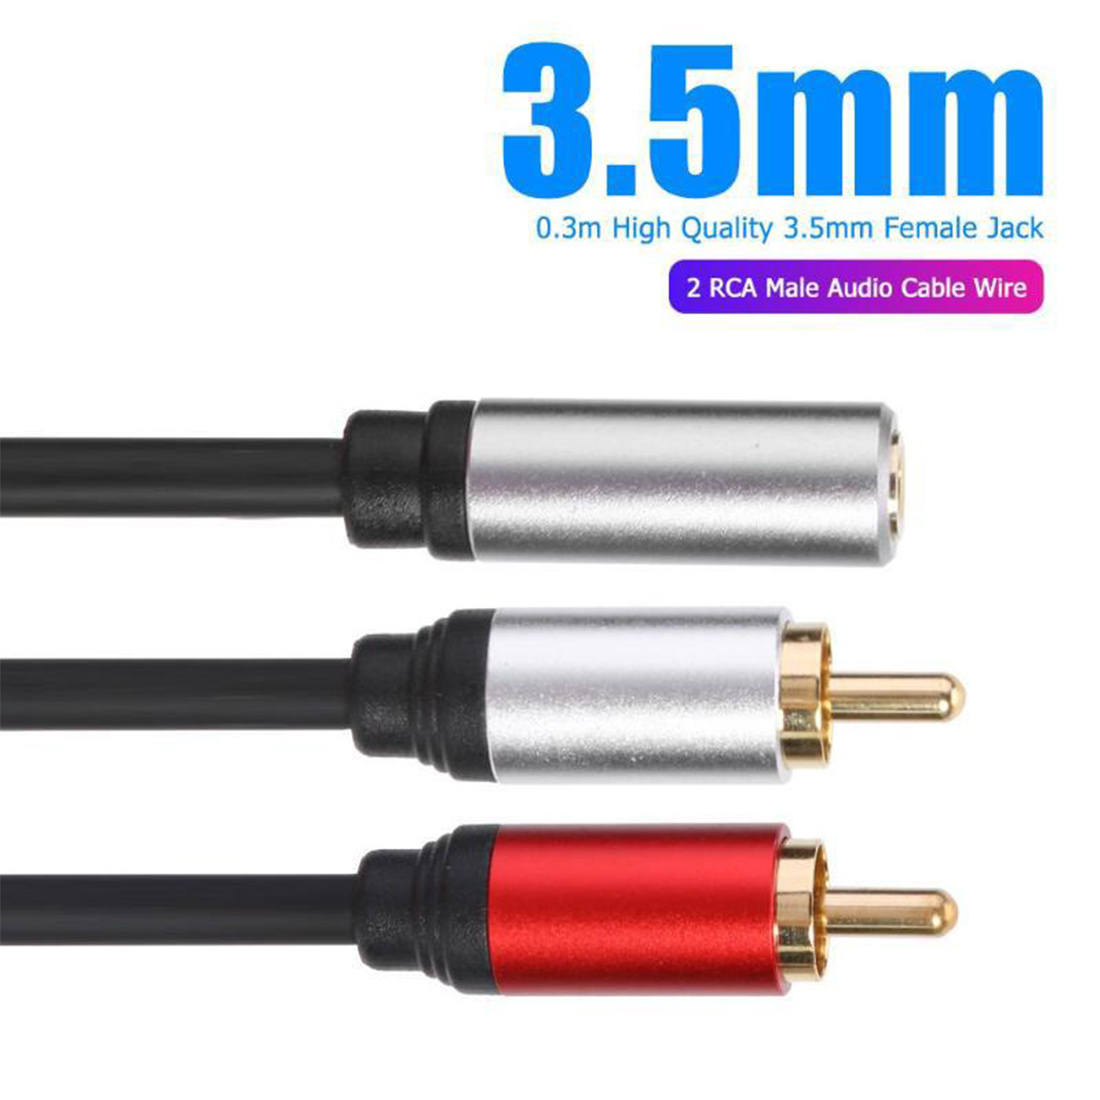 RCA Cable 2RCA Male to 3.5mm Female Audio Aux Cable 3.5mm Jack Rca Cable for MP3 Phone Home Theater DVD 2RCA Audio Cable - image 3 of 5